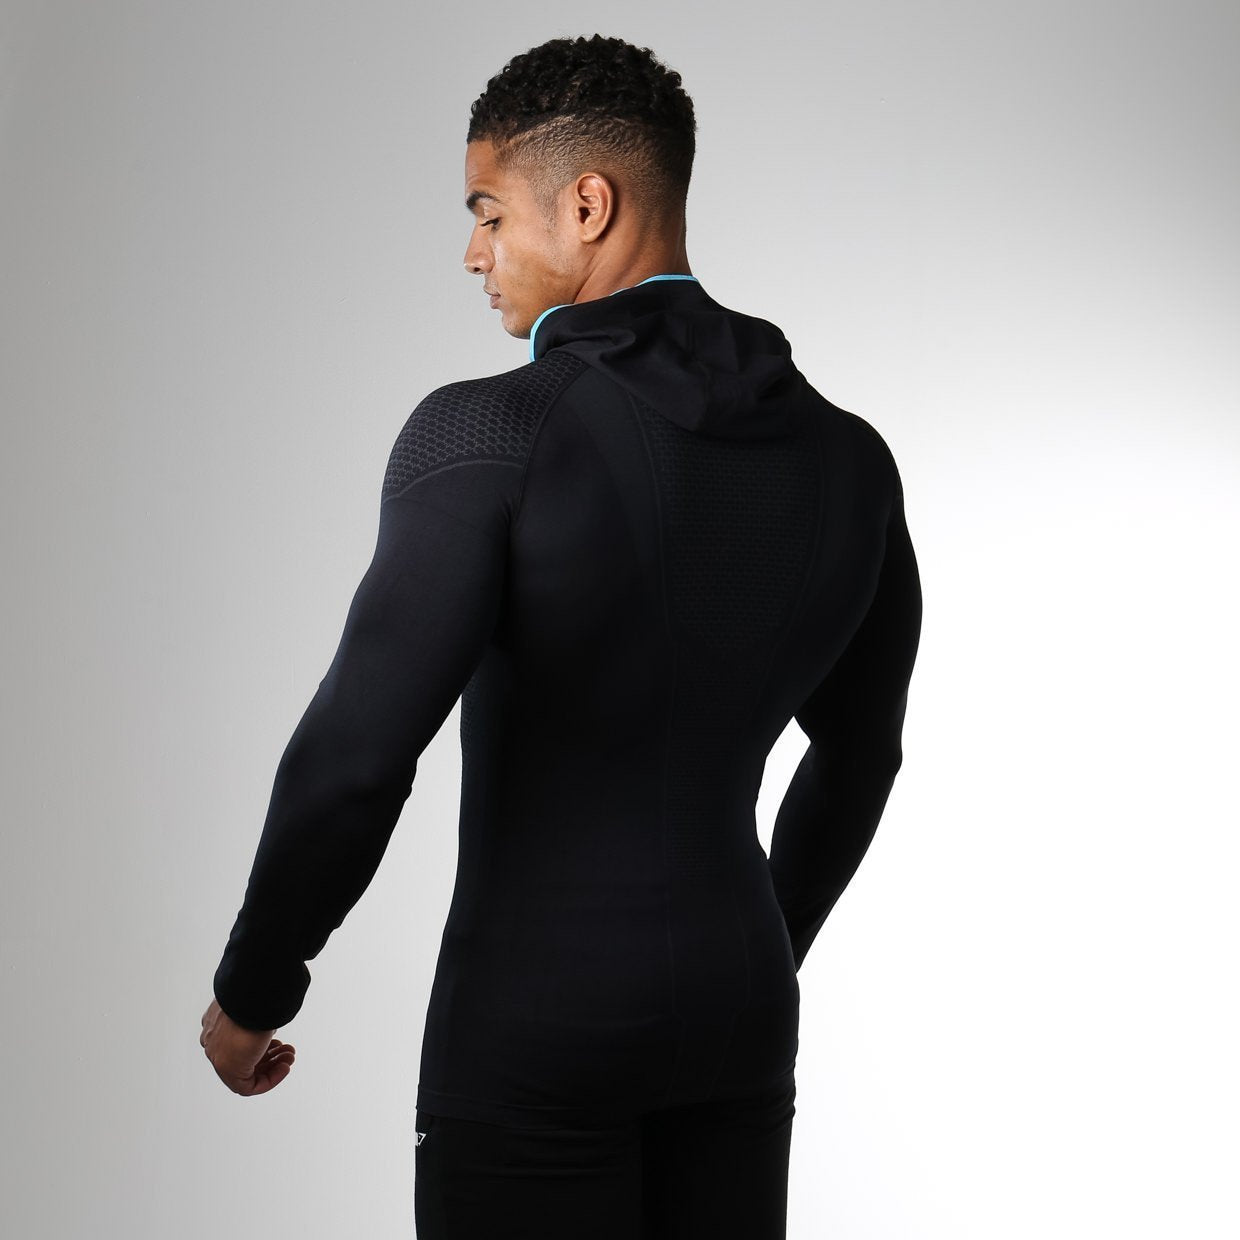 Authentic) Gymshark Onyx Imperial Long Sleeve Hooded top, Women's Fashion,  Tops, Sleeveless on Carousell